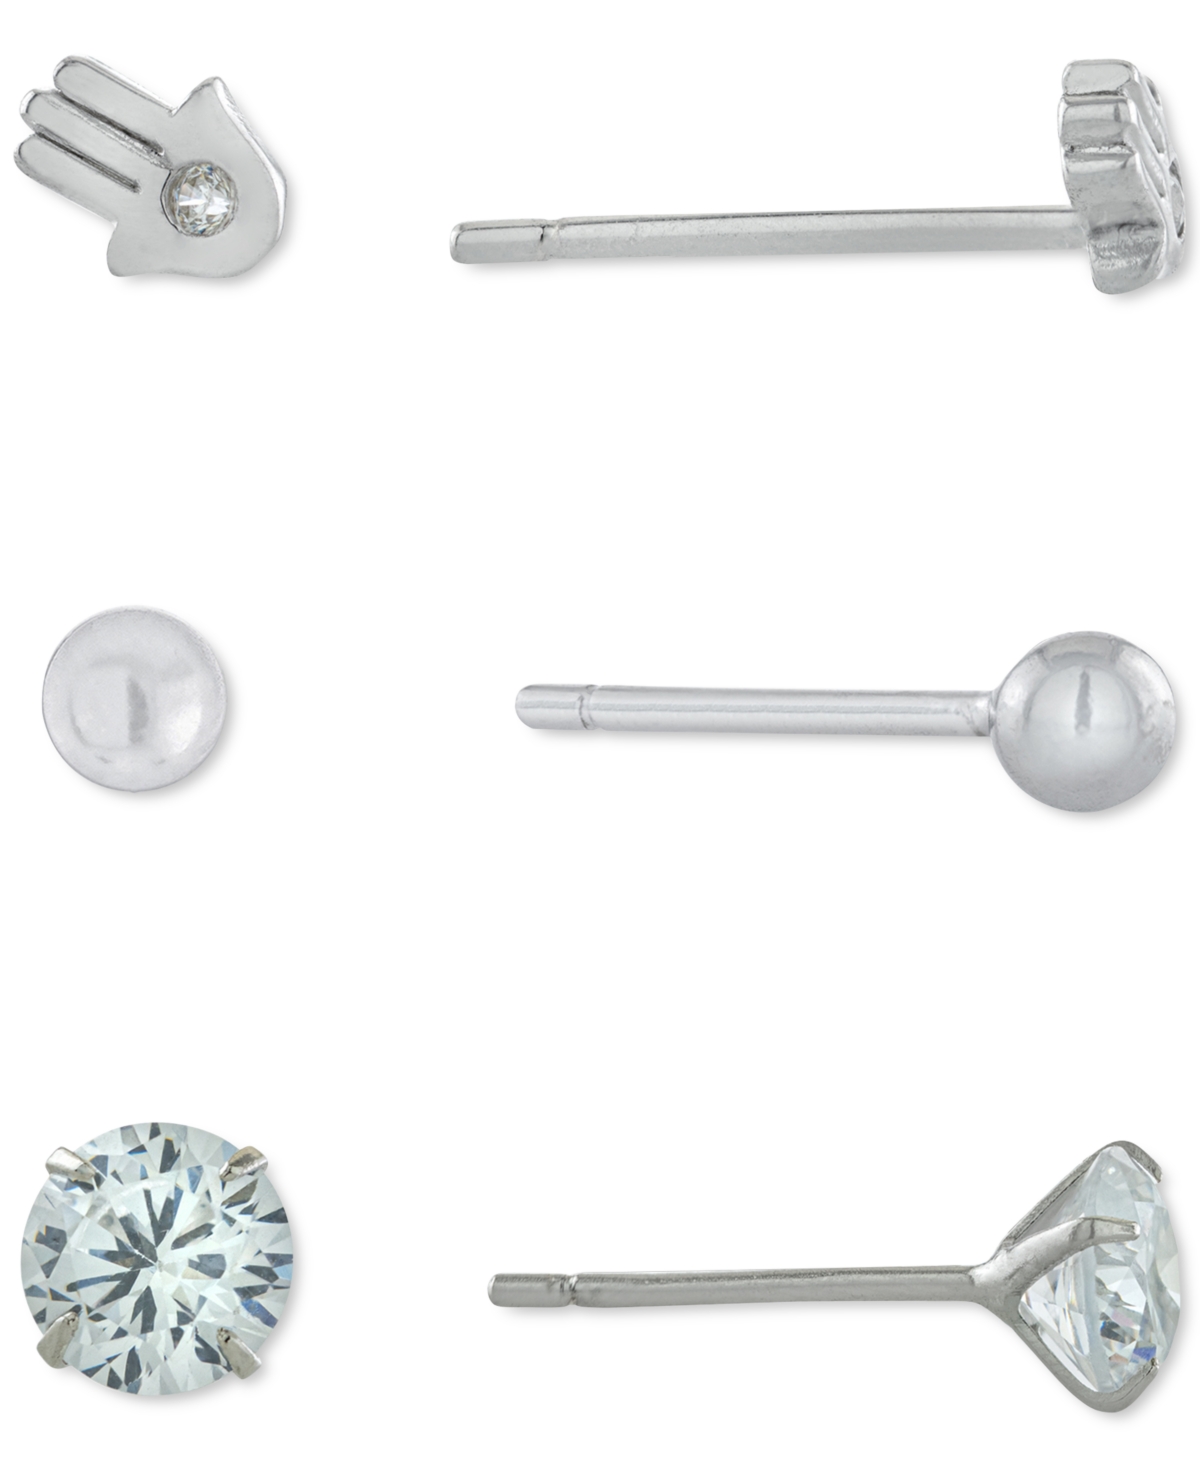 3-Pc. Set Cubic Zirconia, Hamsa Hand, & Polished Ball Stud Earrings in Sterling Silver, Created for Macy's - Sterling Silver